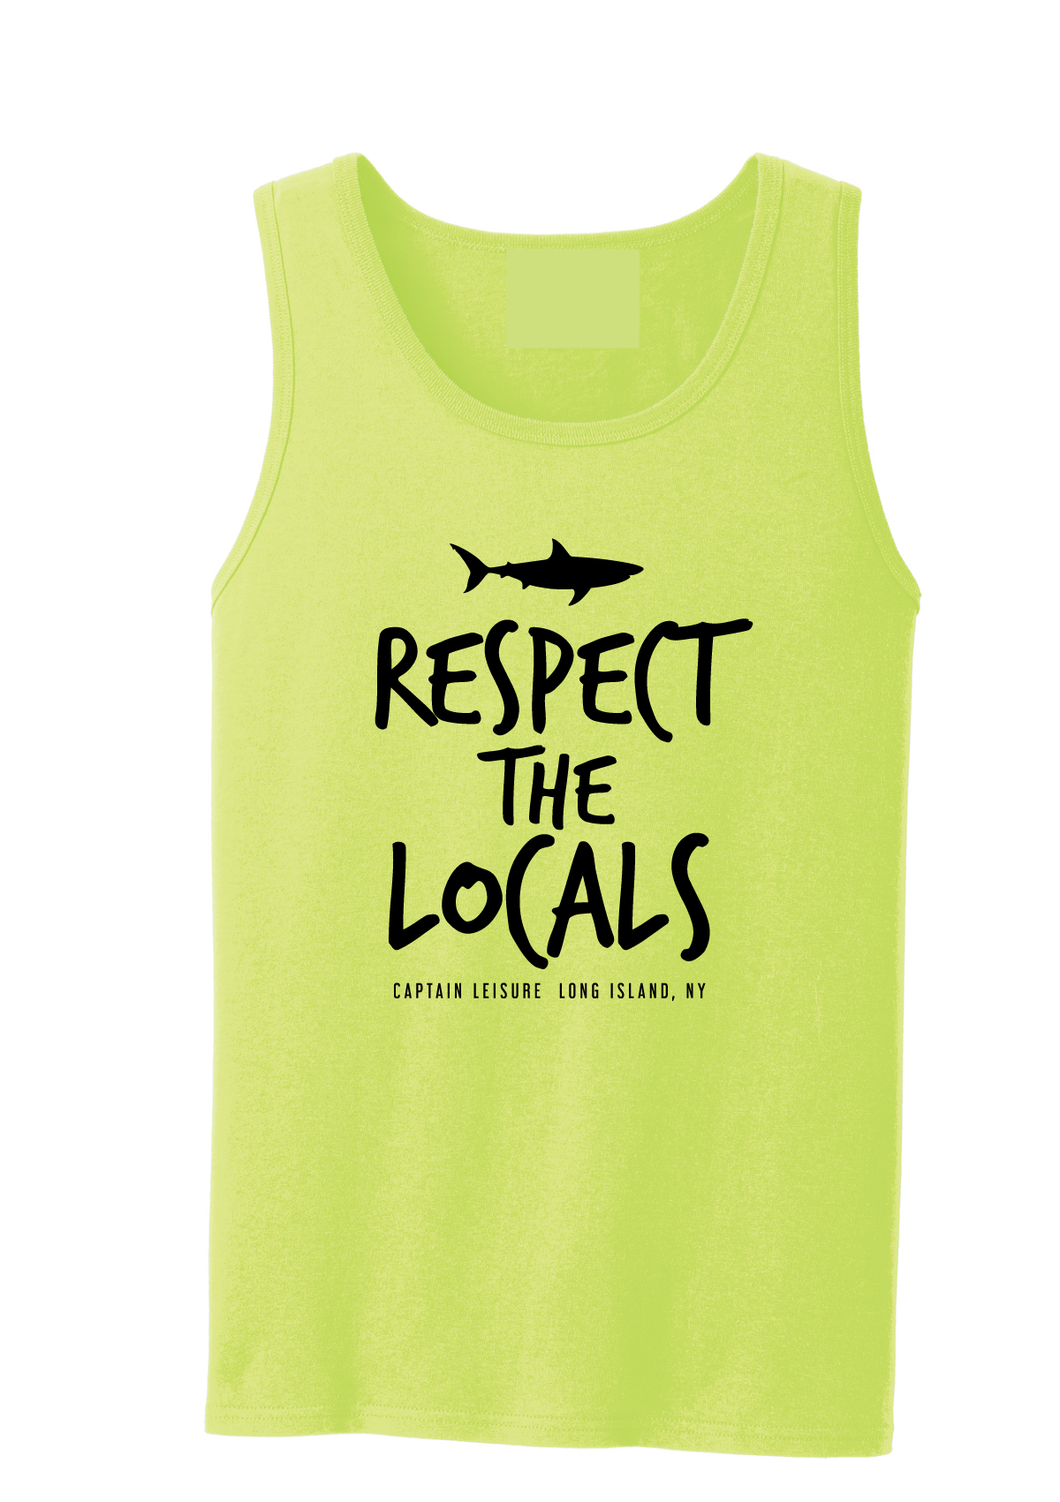 SALE: Respect the Locals Mens Tank - Neon Yellow